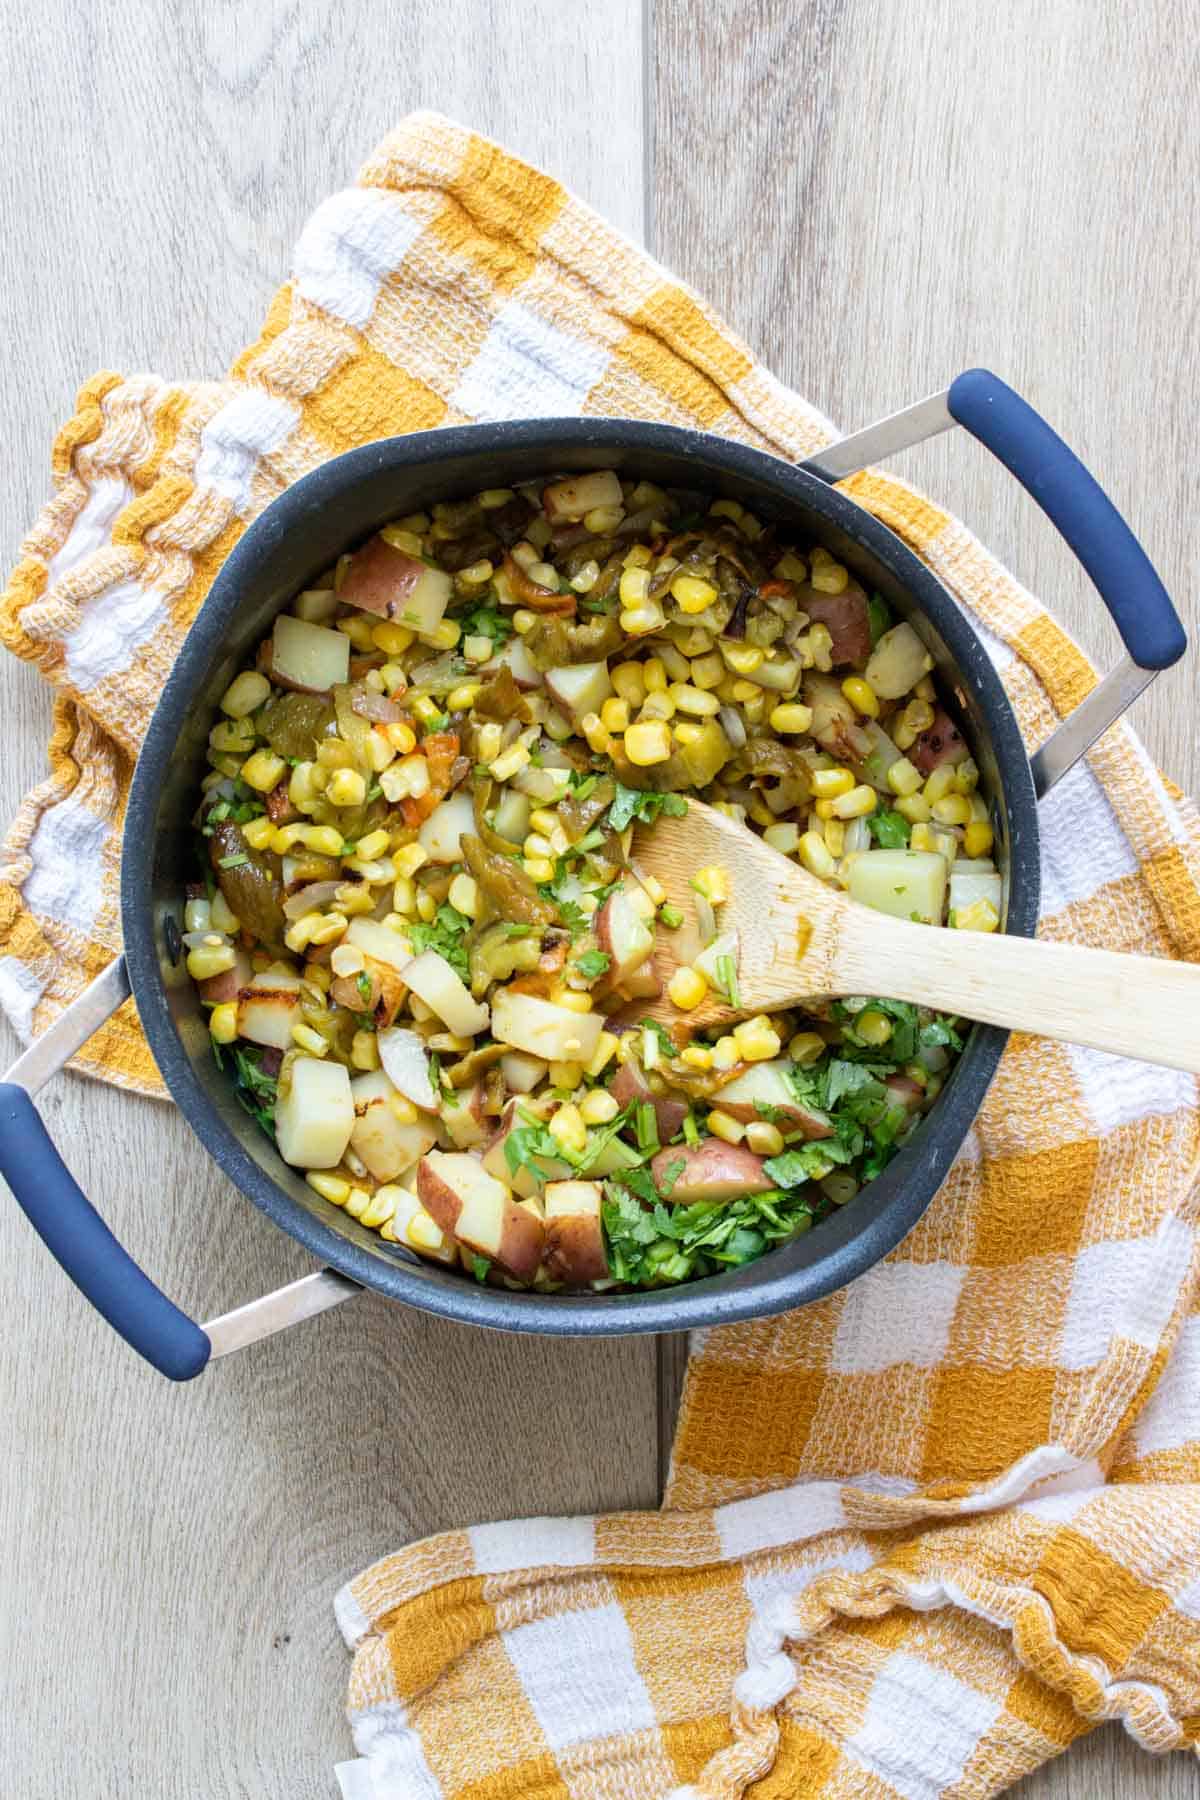 Wooden spoon mixing chopped potatoes, corn and peppers in a pot.